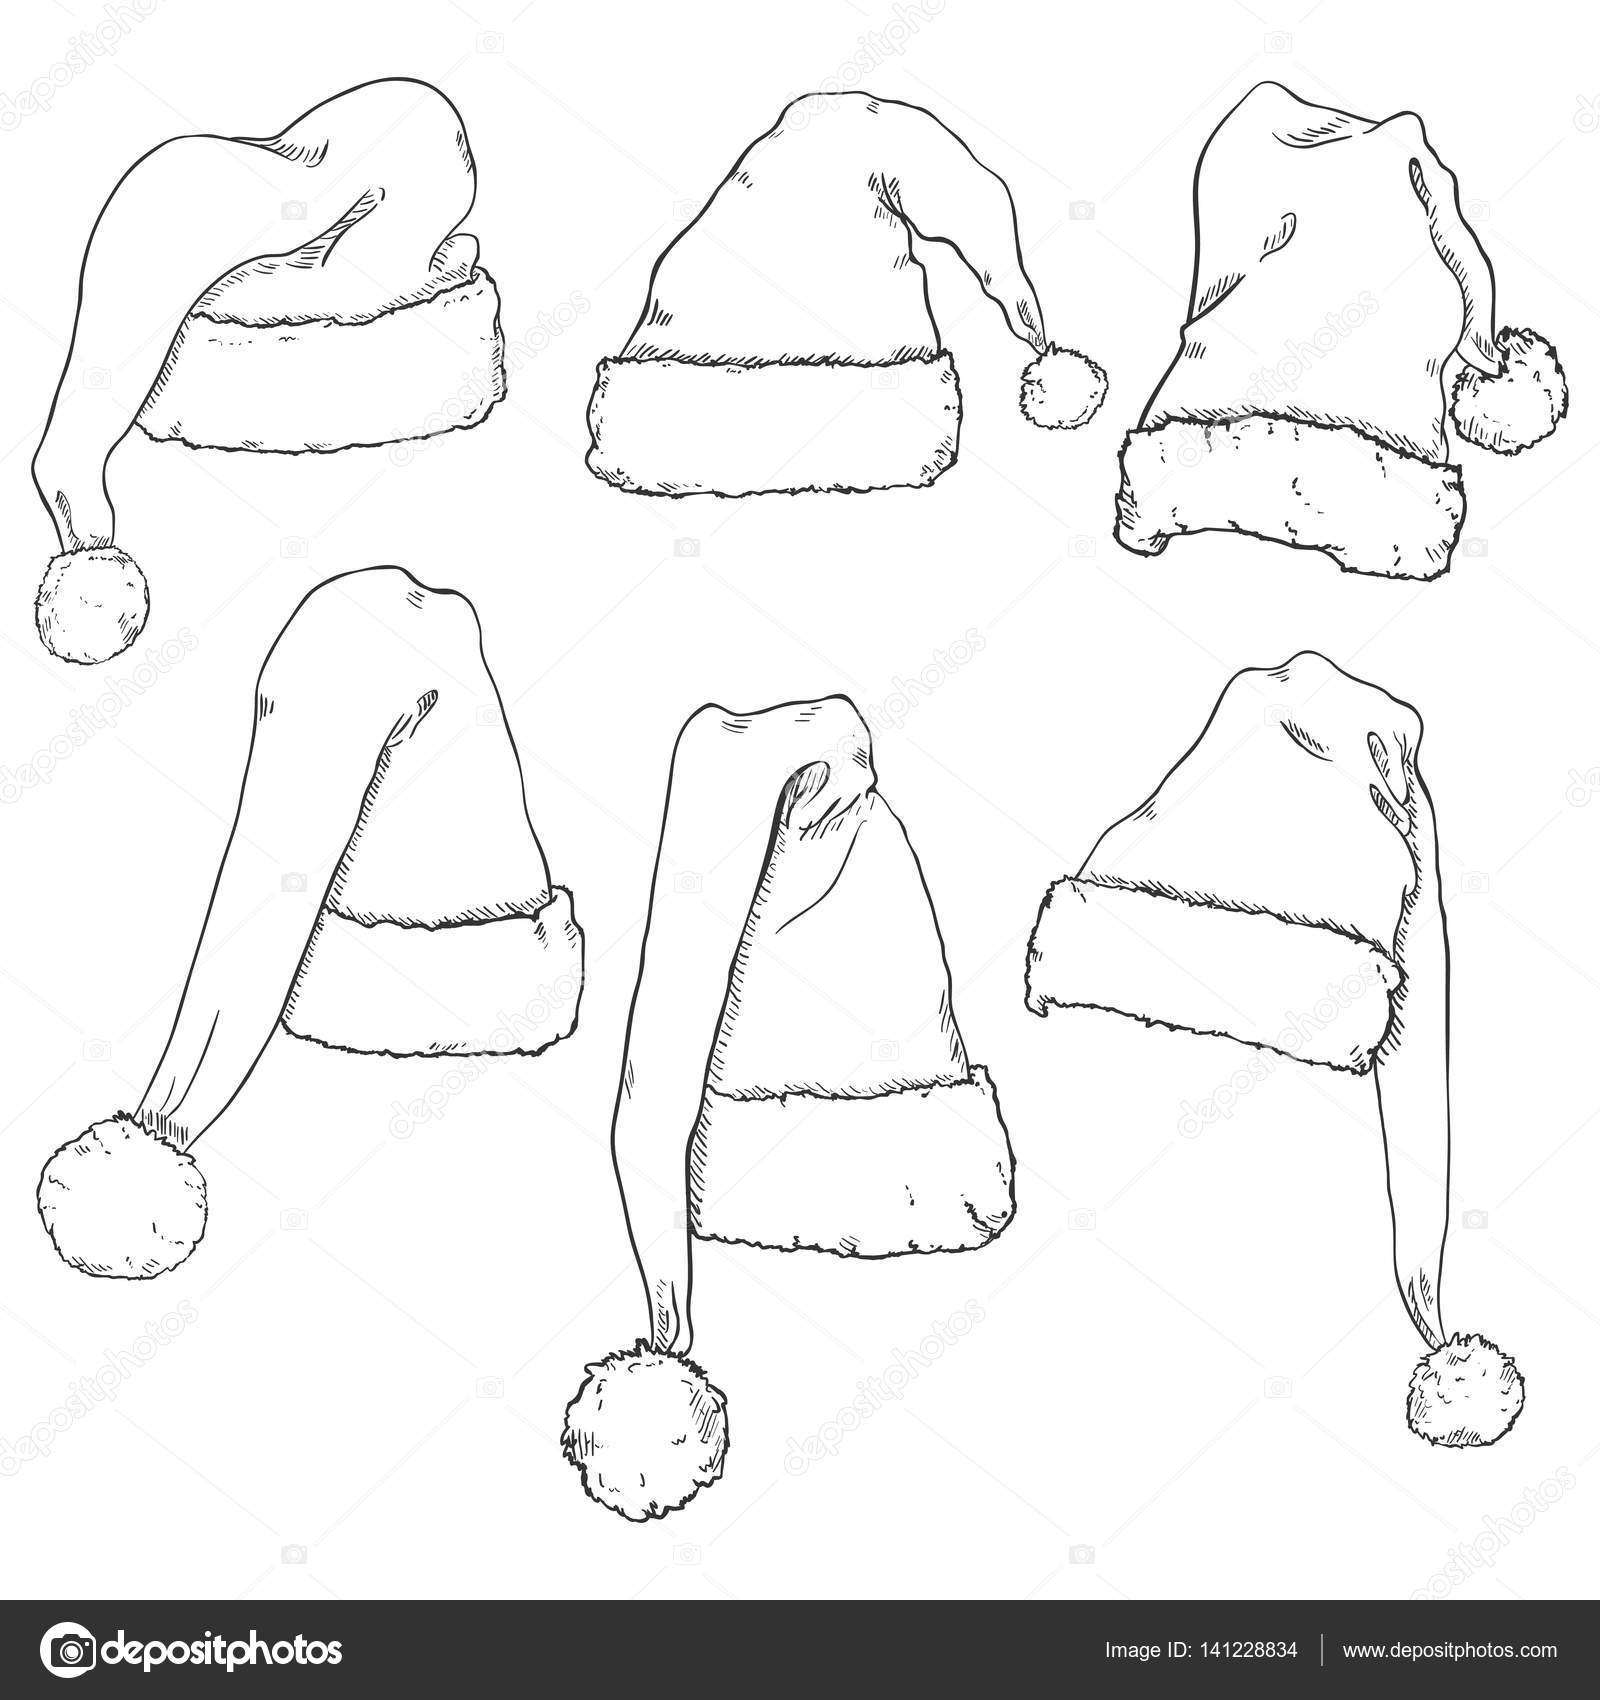 2 Ways How To Draw A Santa Hat - Simple Santa Hat Drawing Step By Step